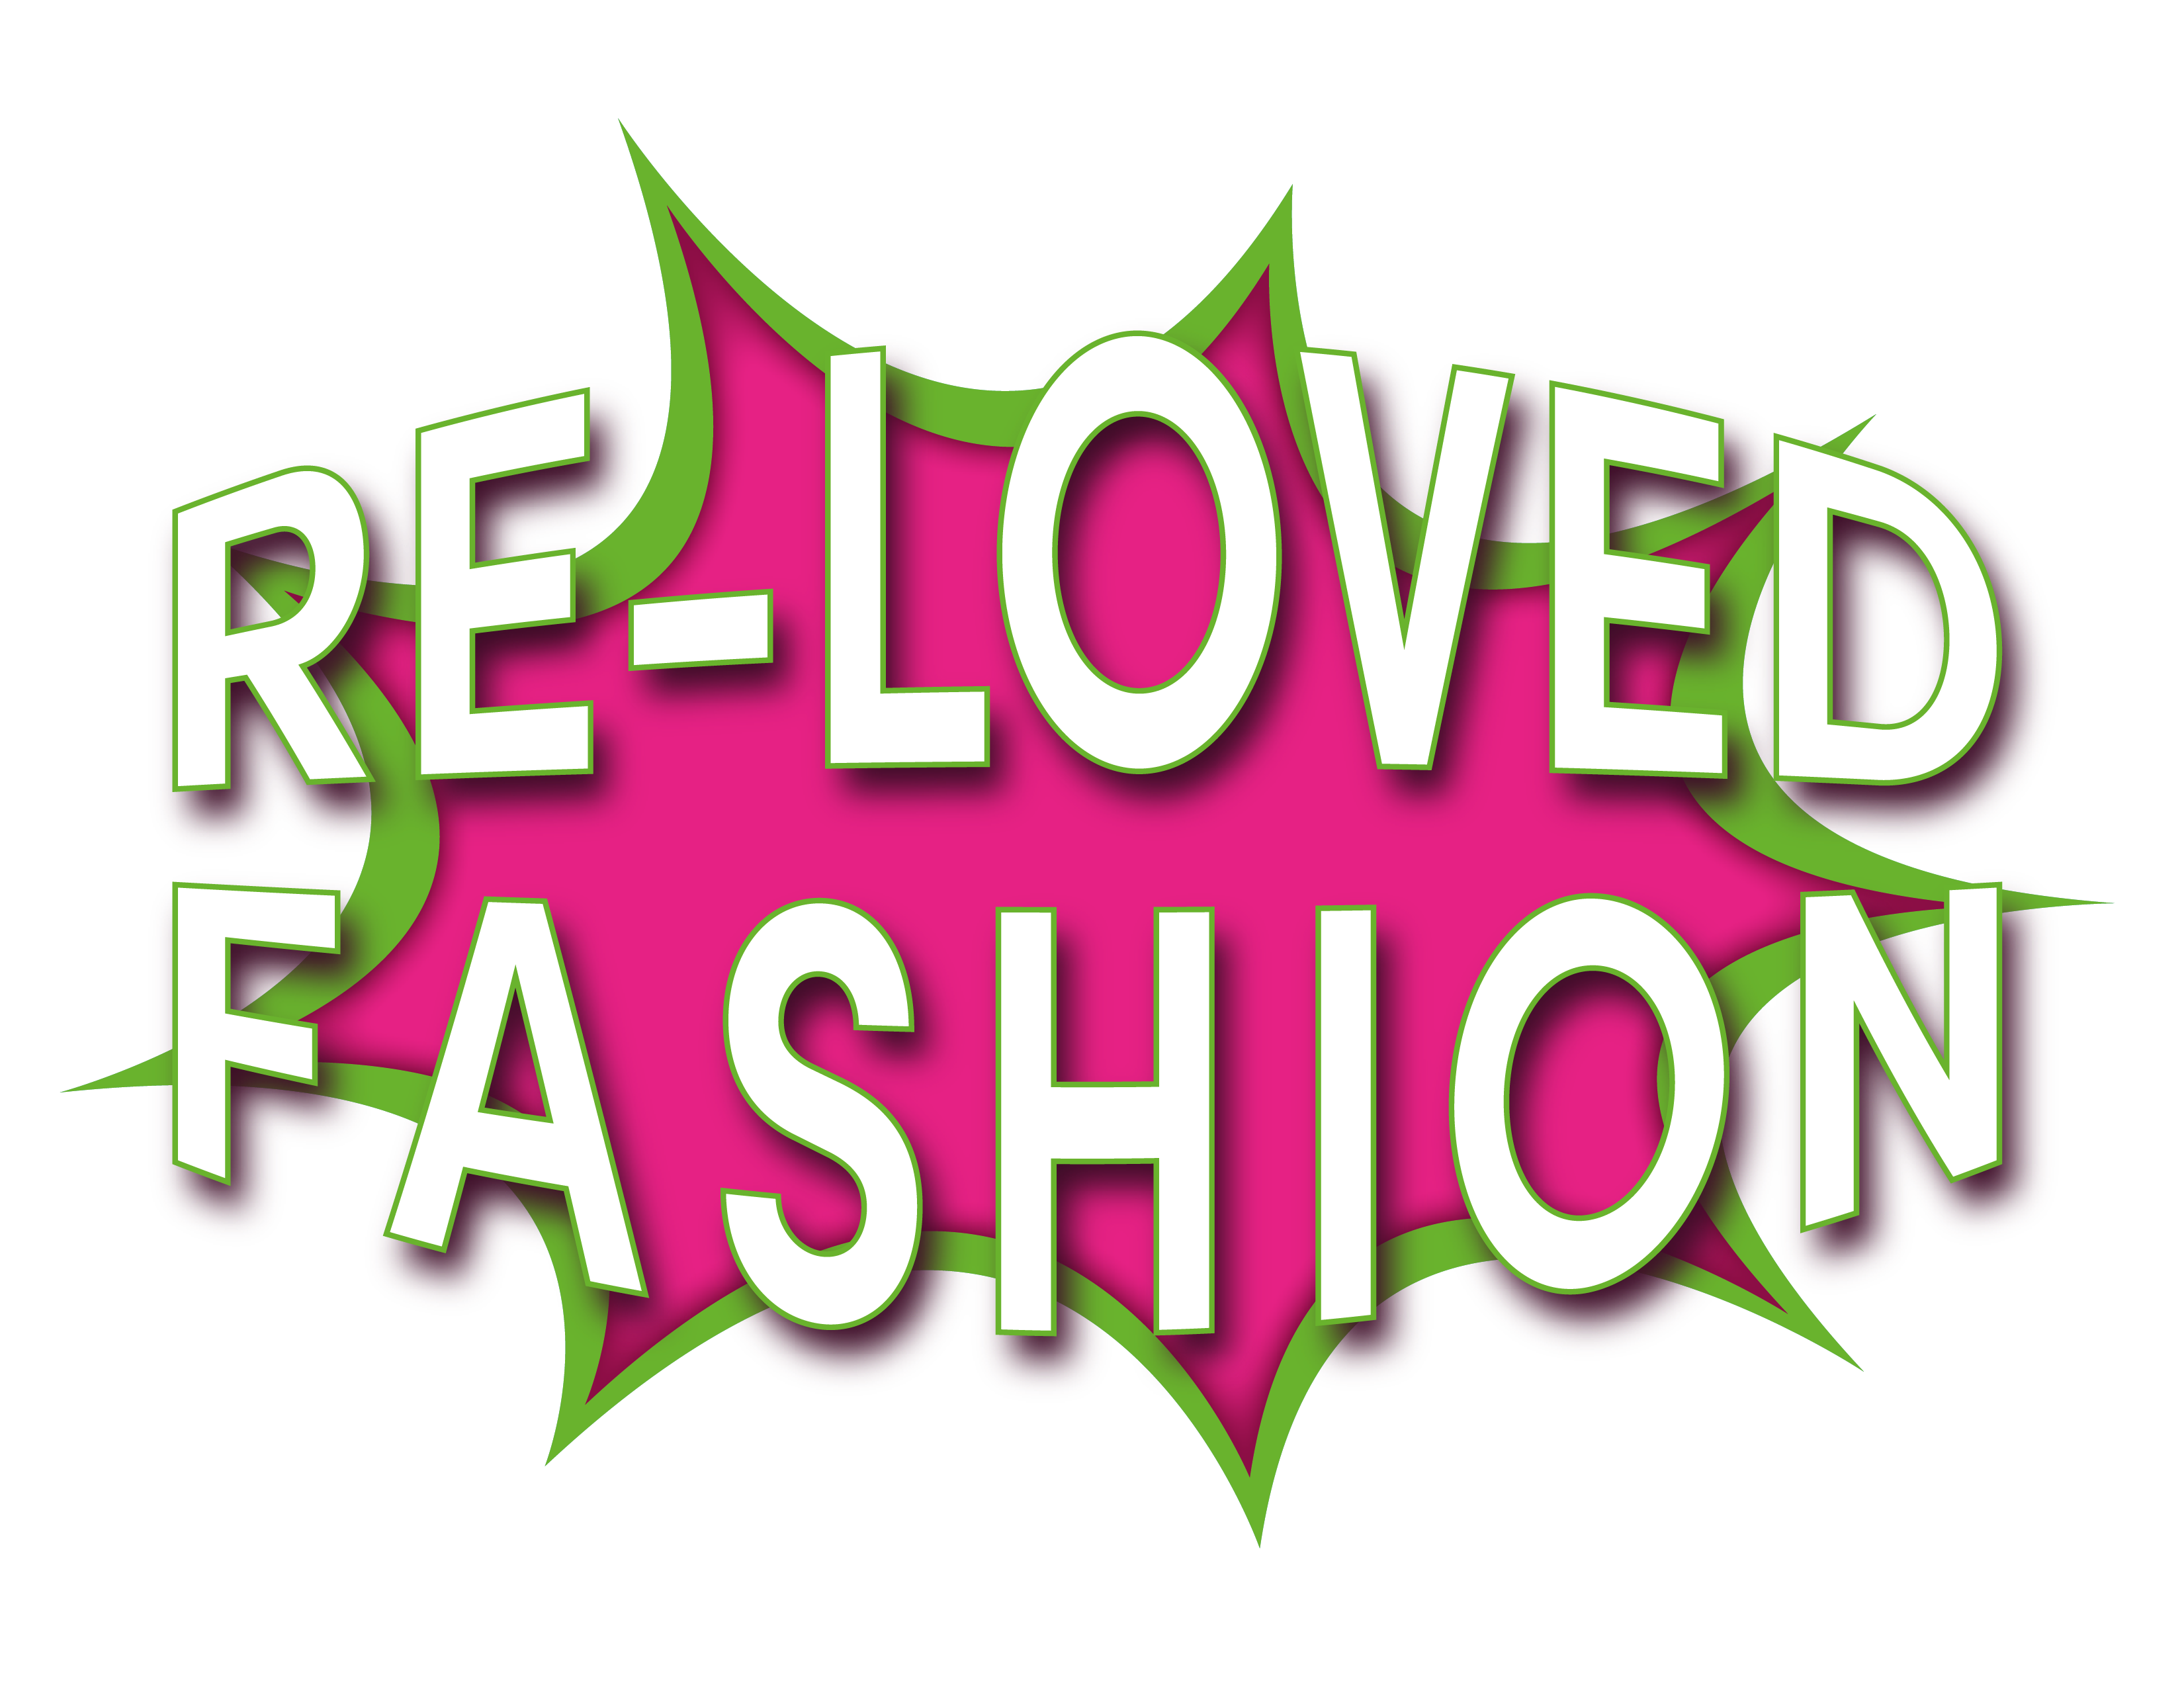 Re-Loved Fashion